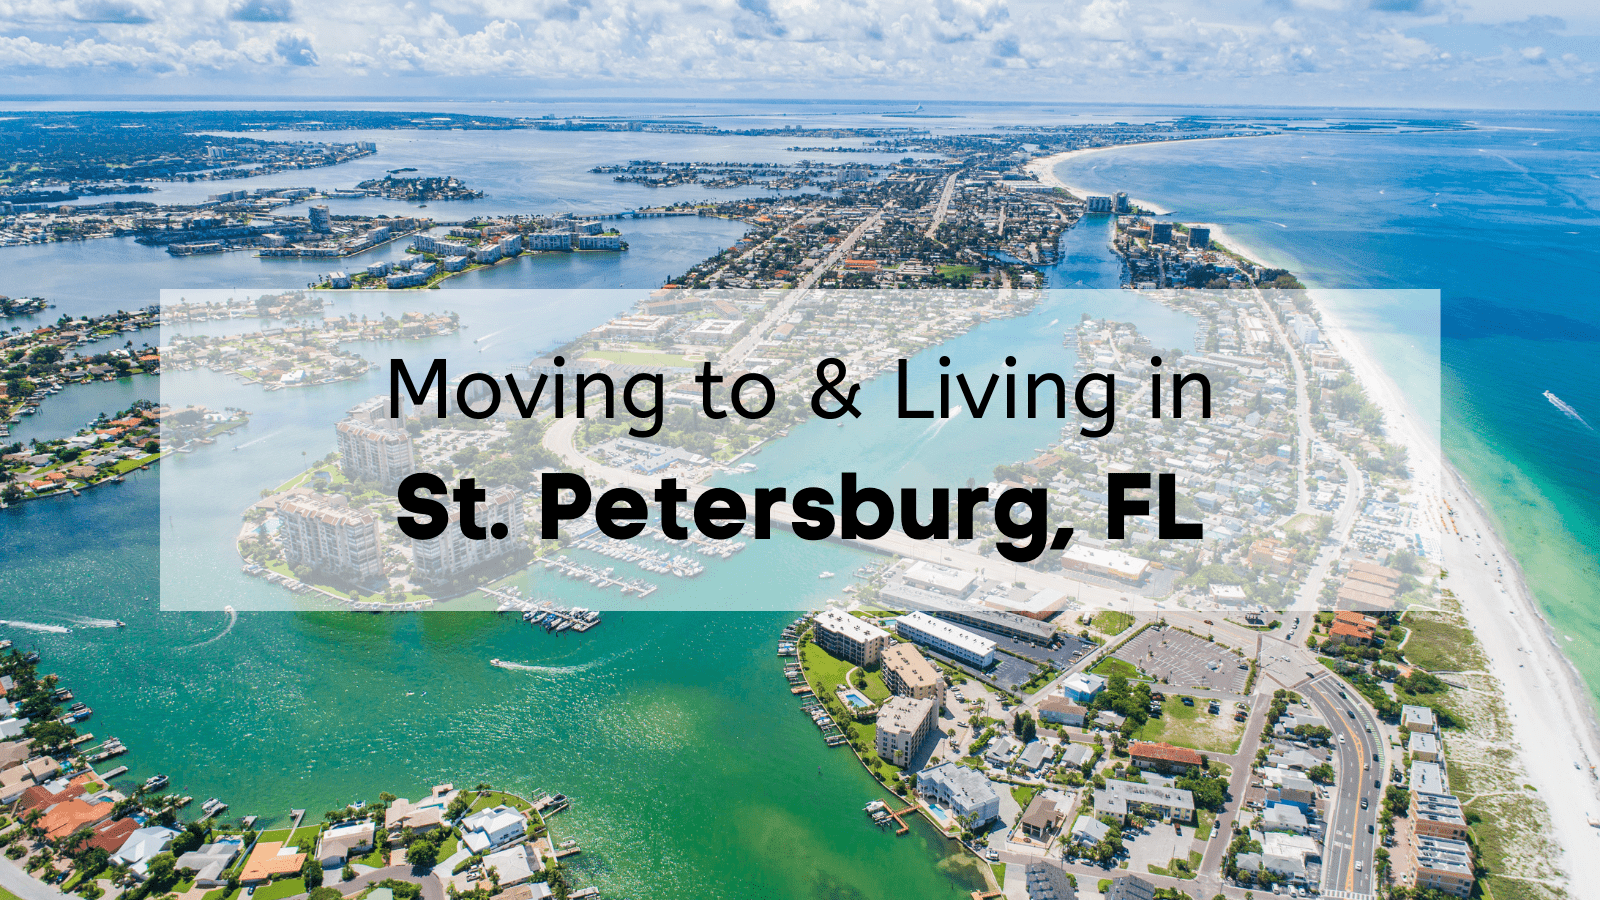 Moving to & living in St. Petersburg, FL